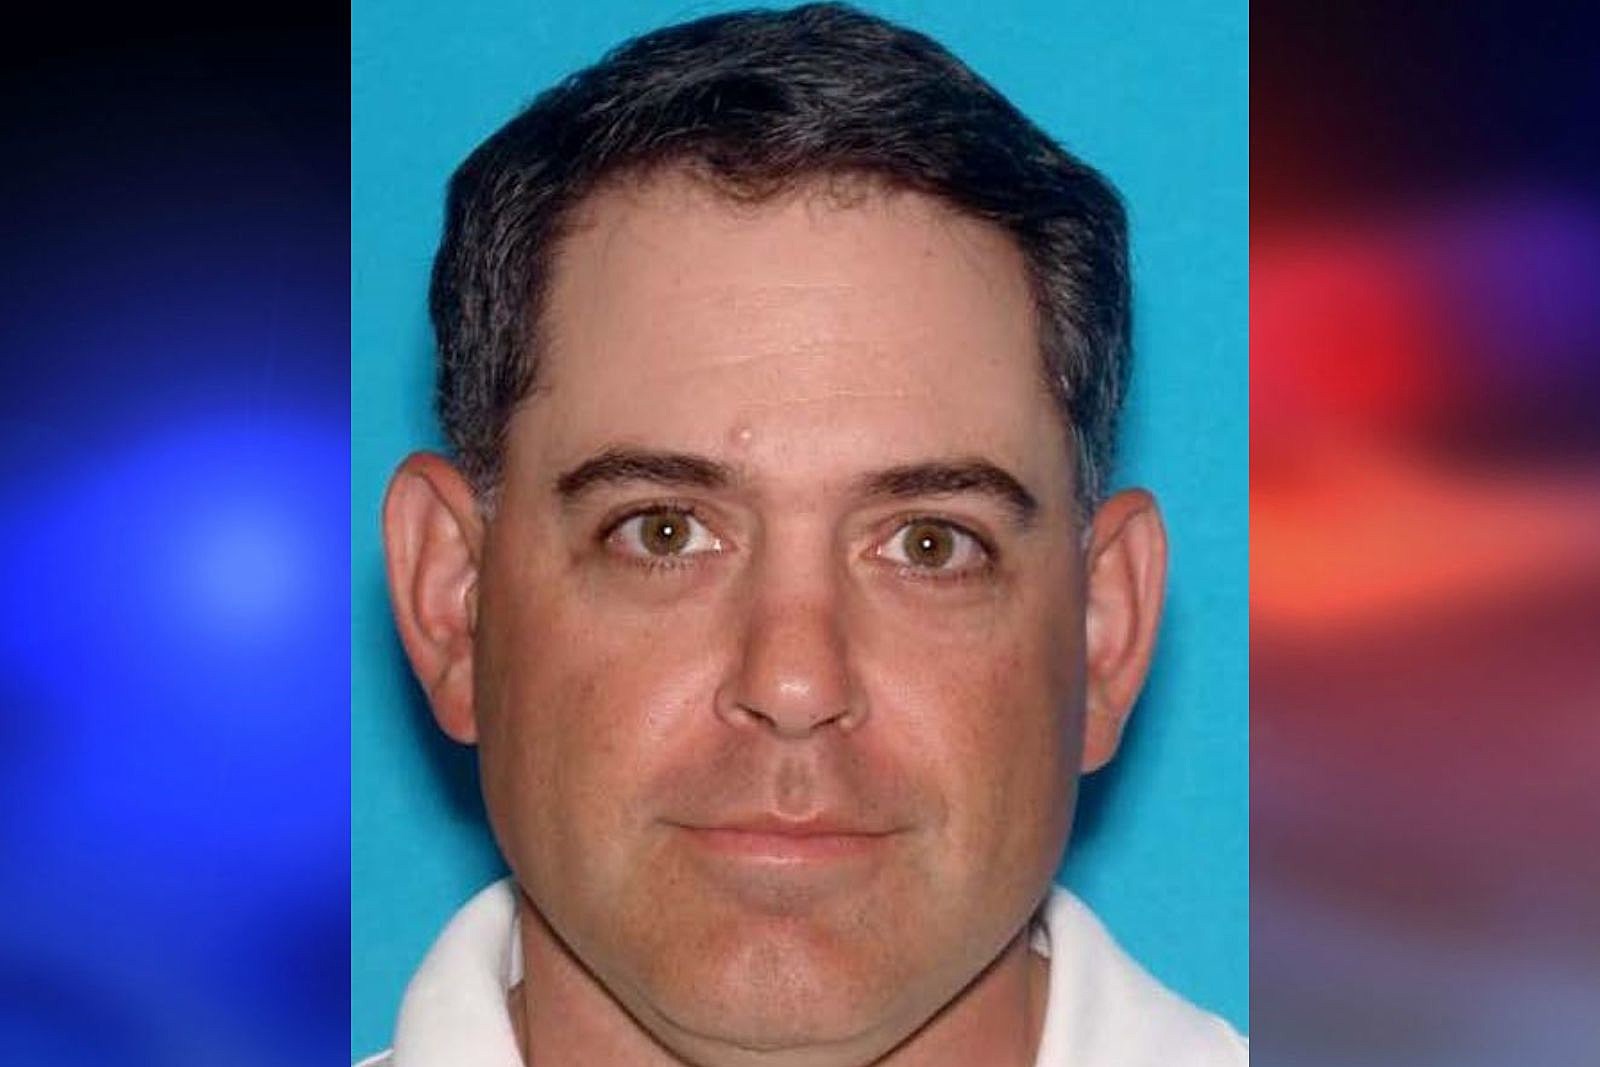 NJ golf instructor accused of groping young woman during lesson image